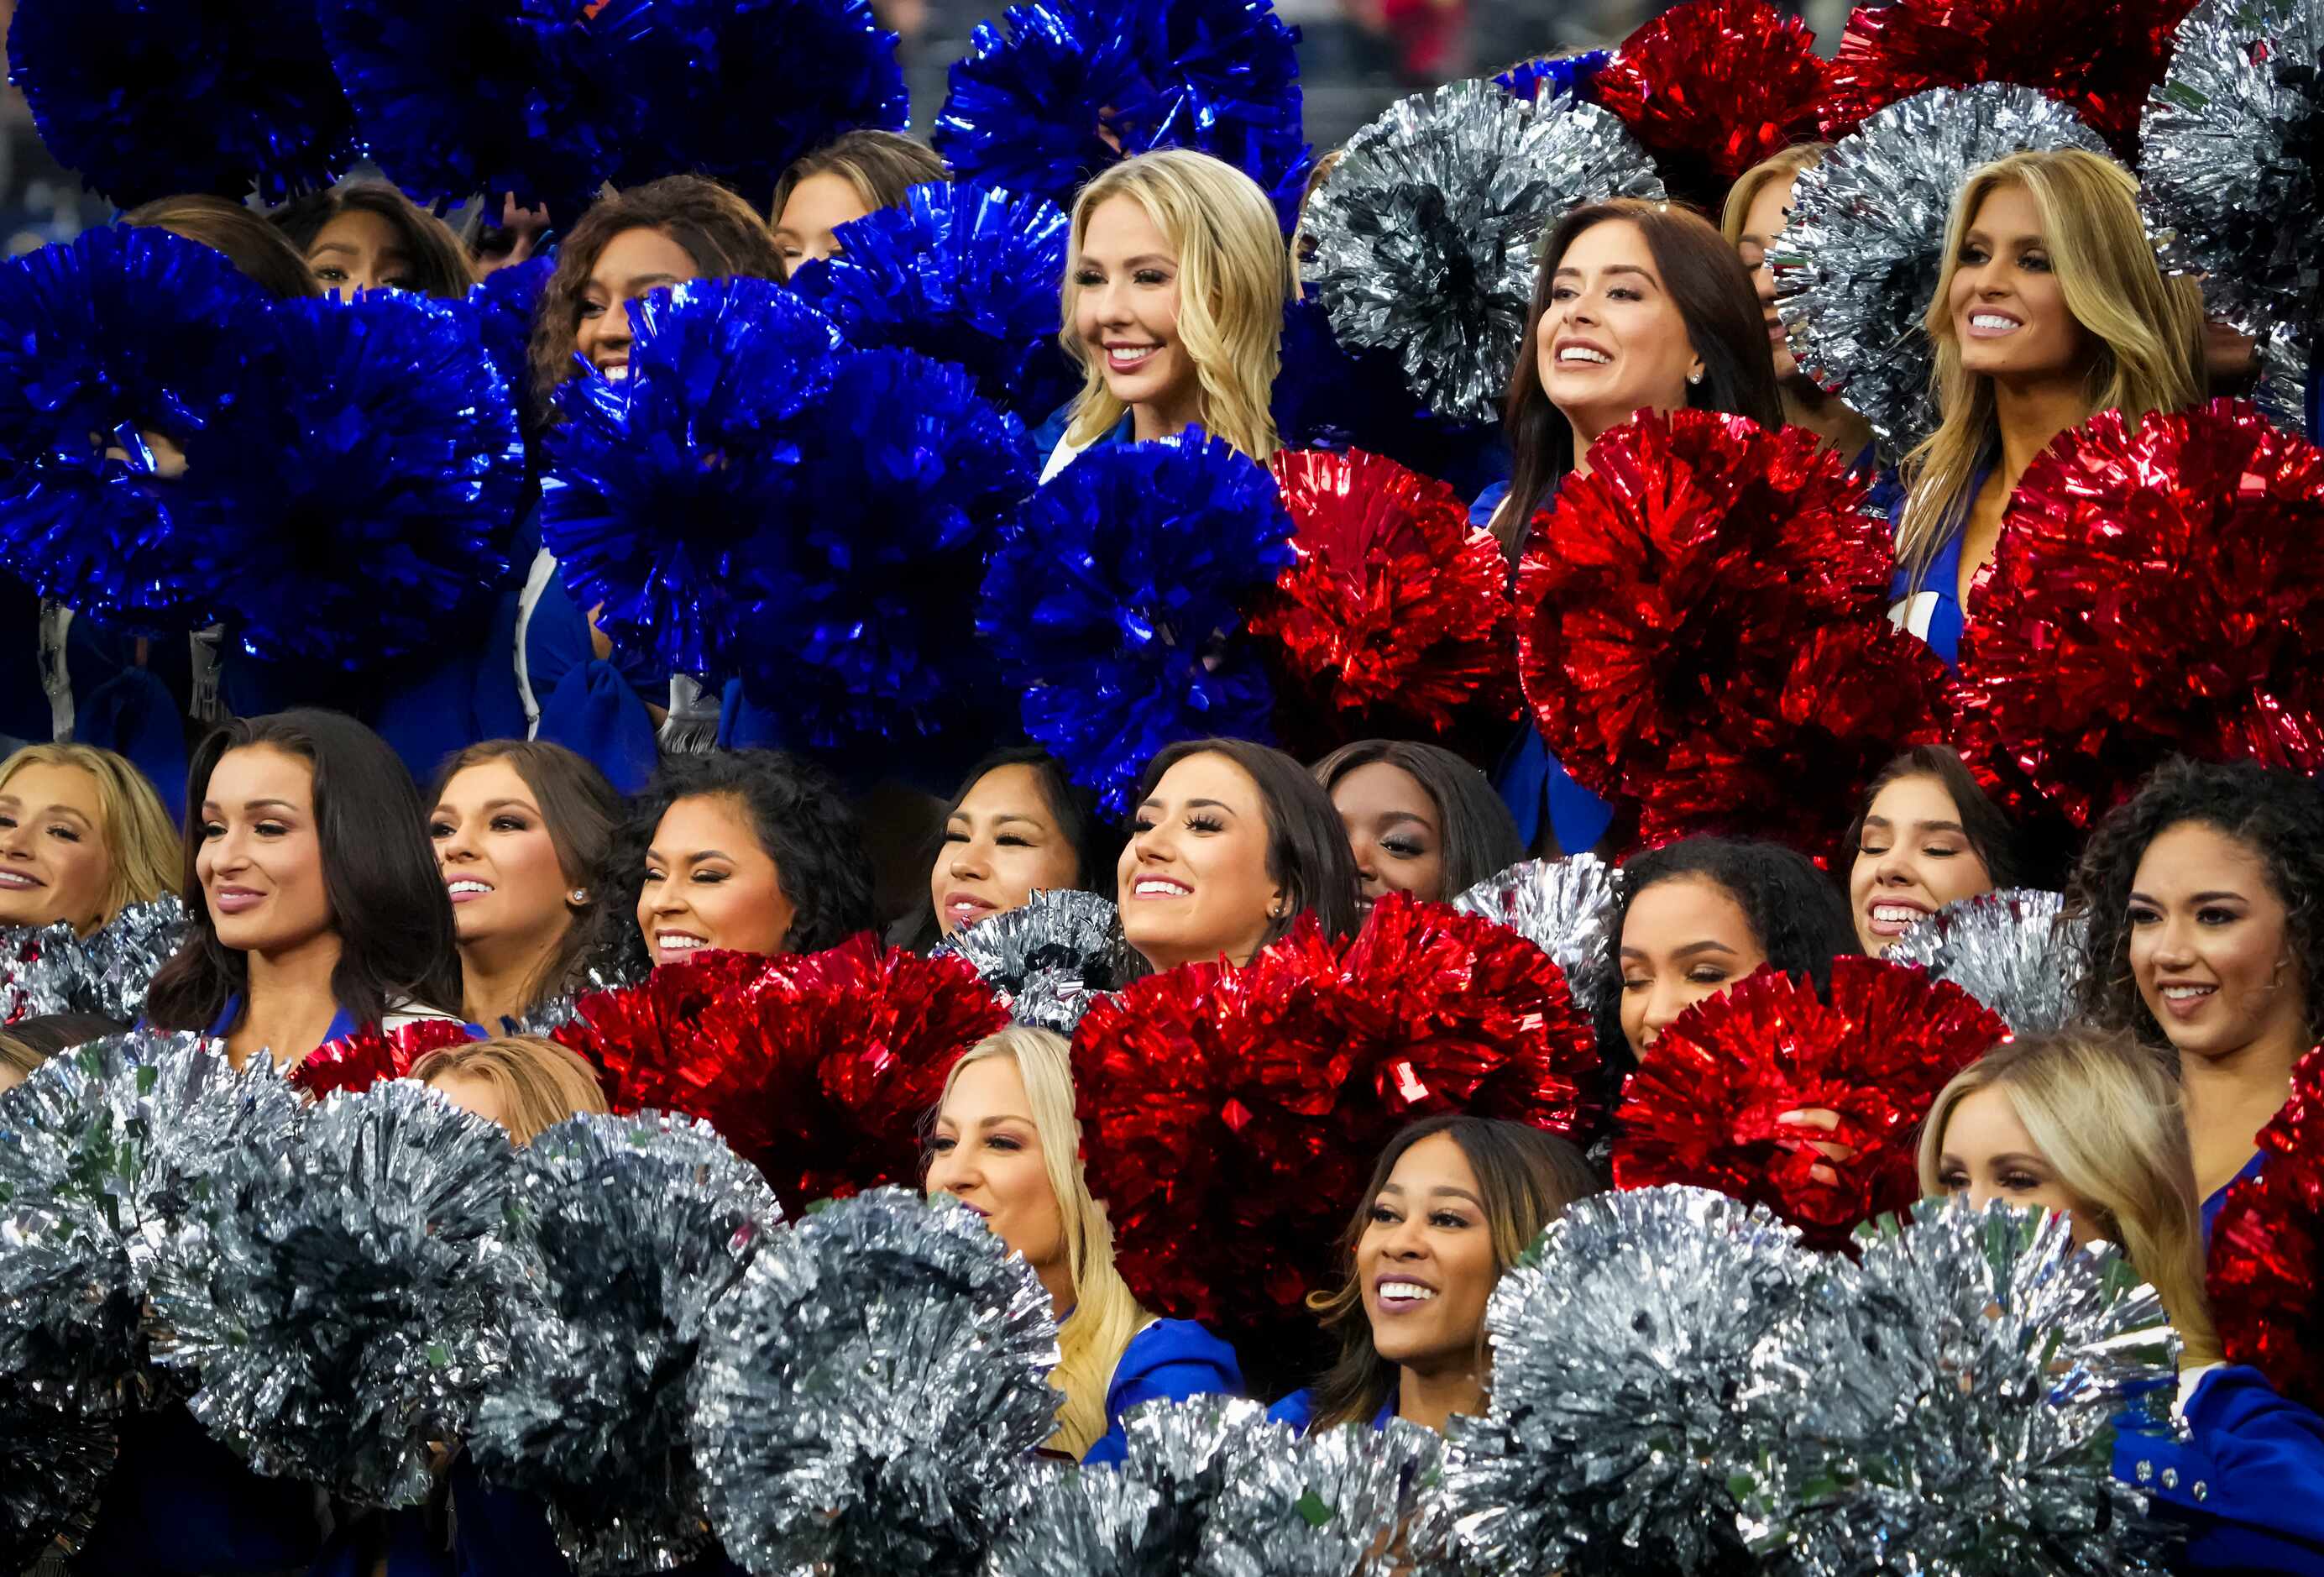 Dallas Cowboys cheerleaders carry silver, white and blue pom poms during halftime of an NFL...